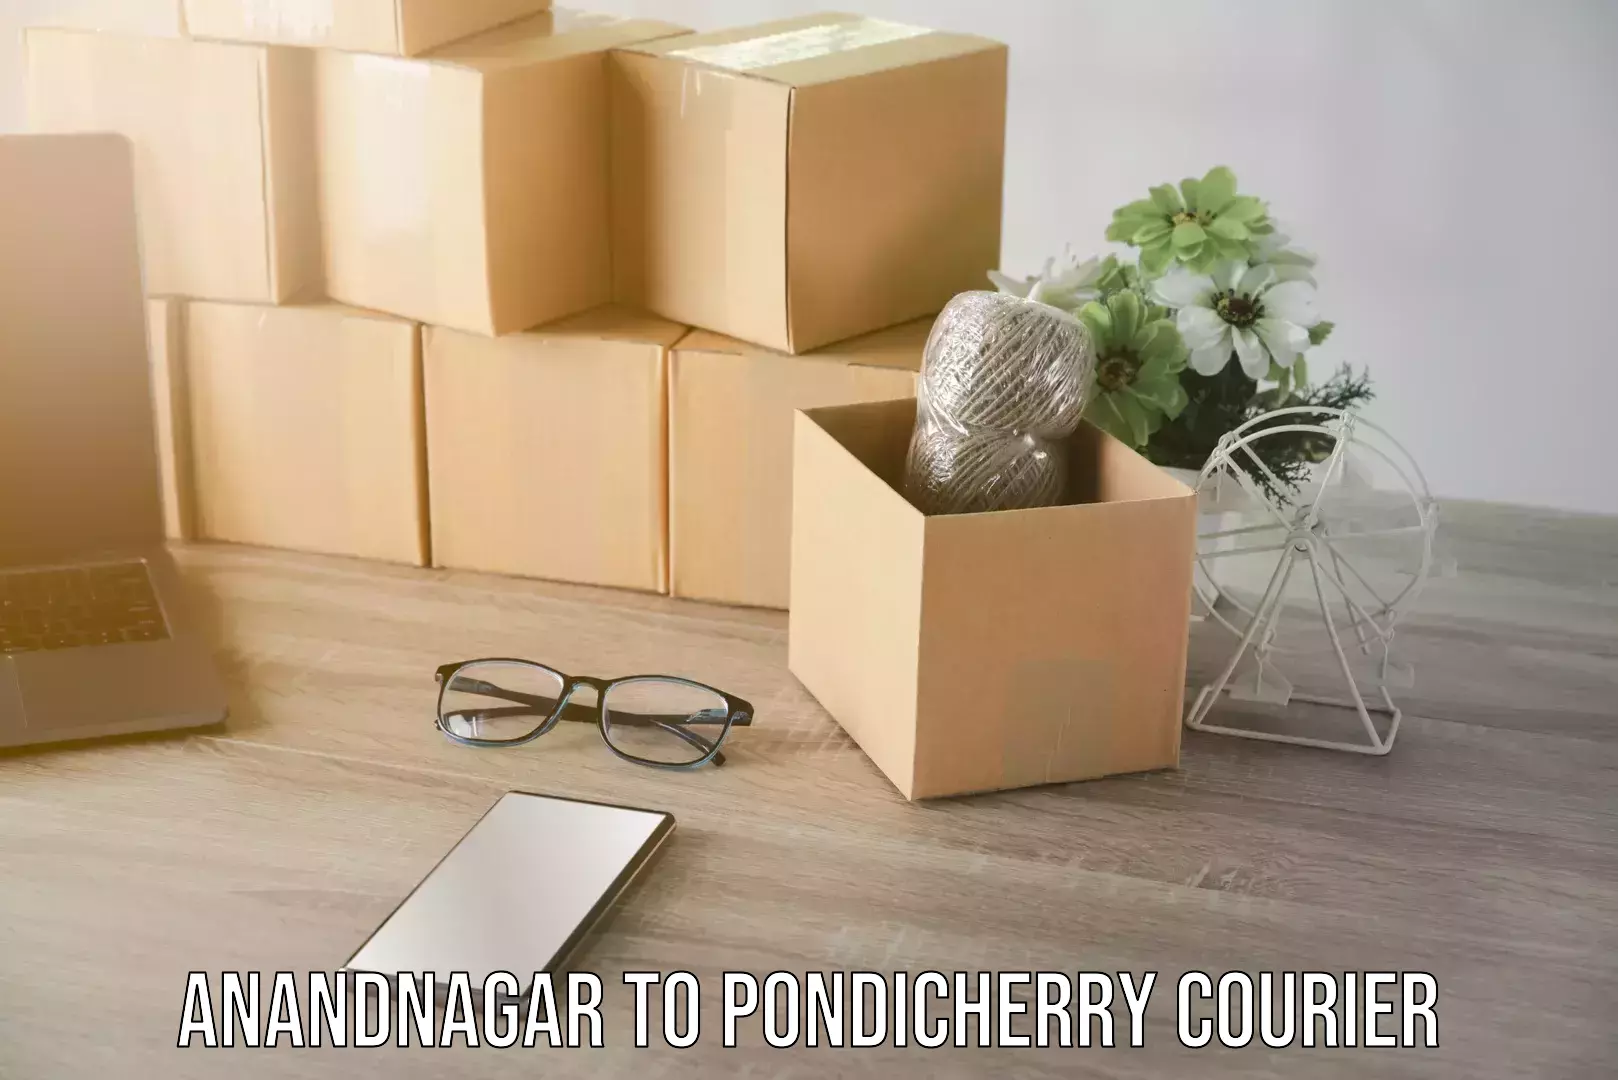 Fast shipping solutions Anandnagar to Pondicherry